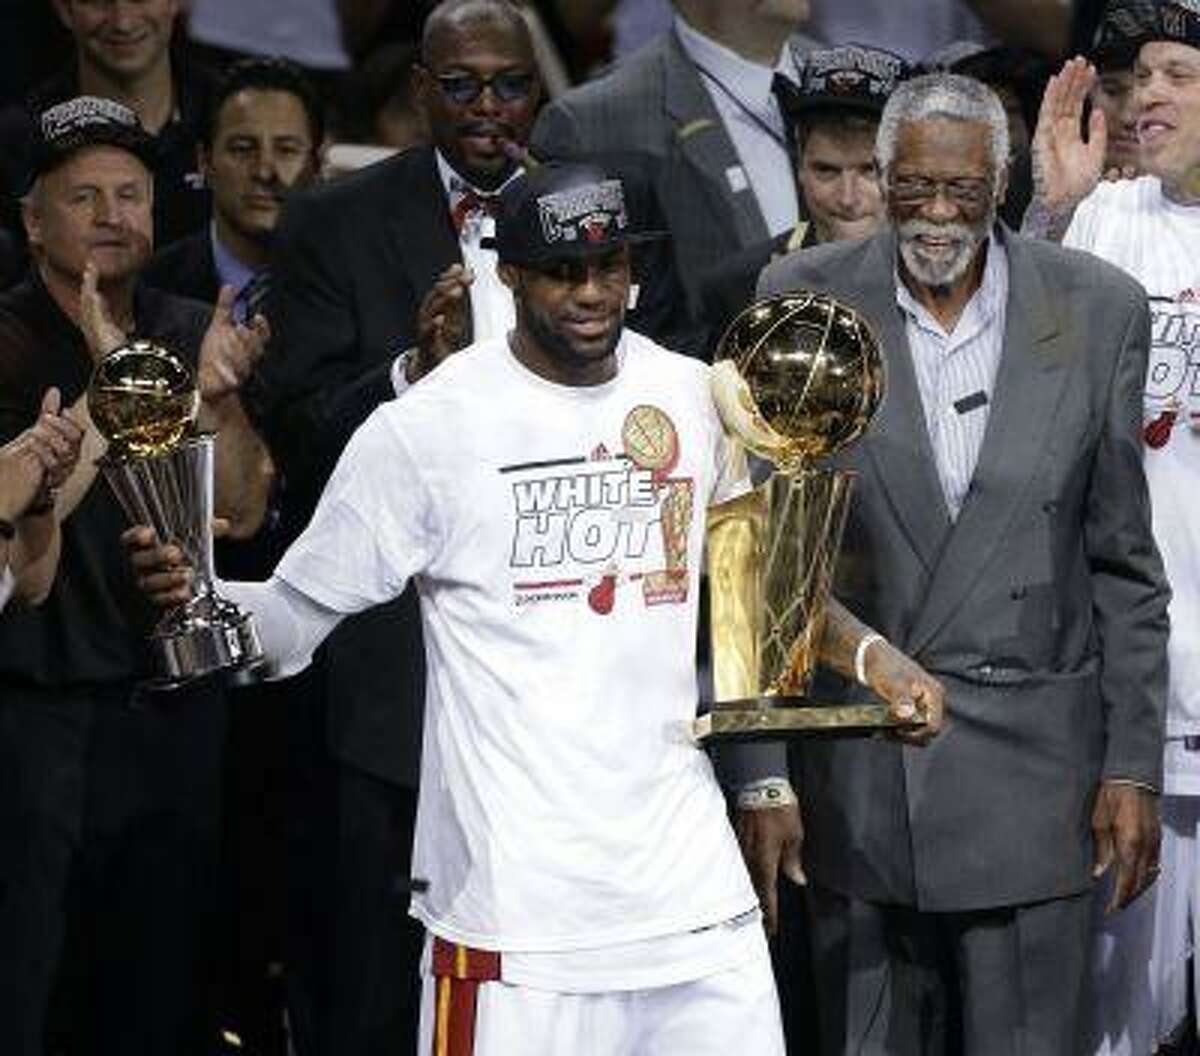 LeBron James named NBA Finals MVP for second straight year[1